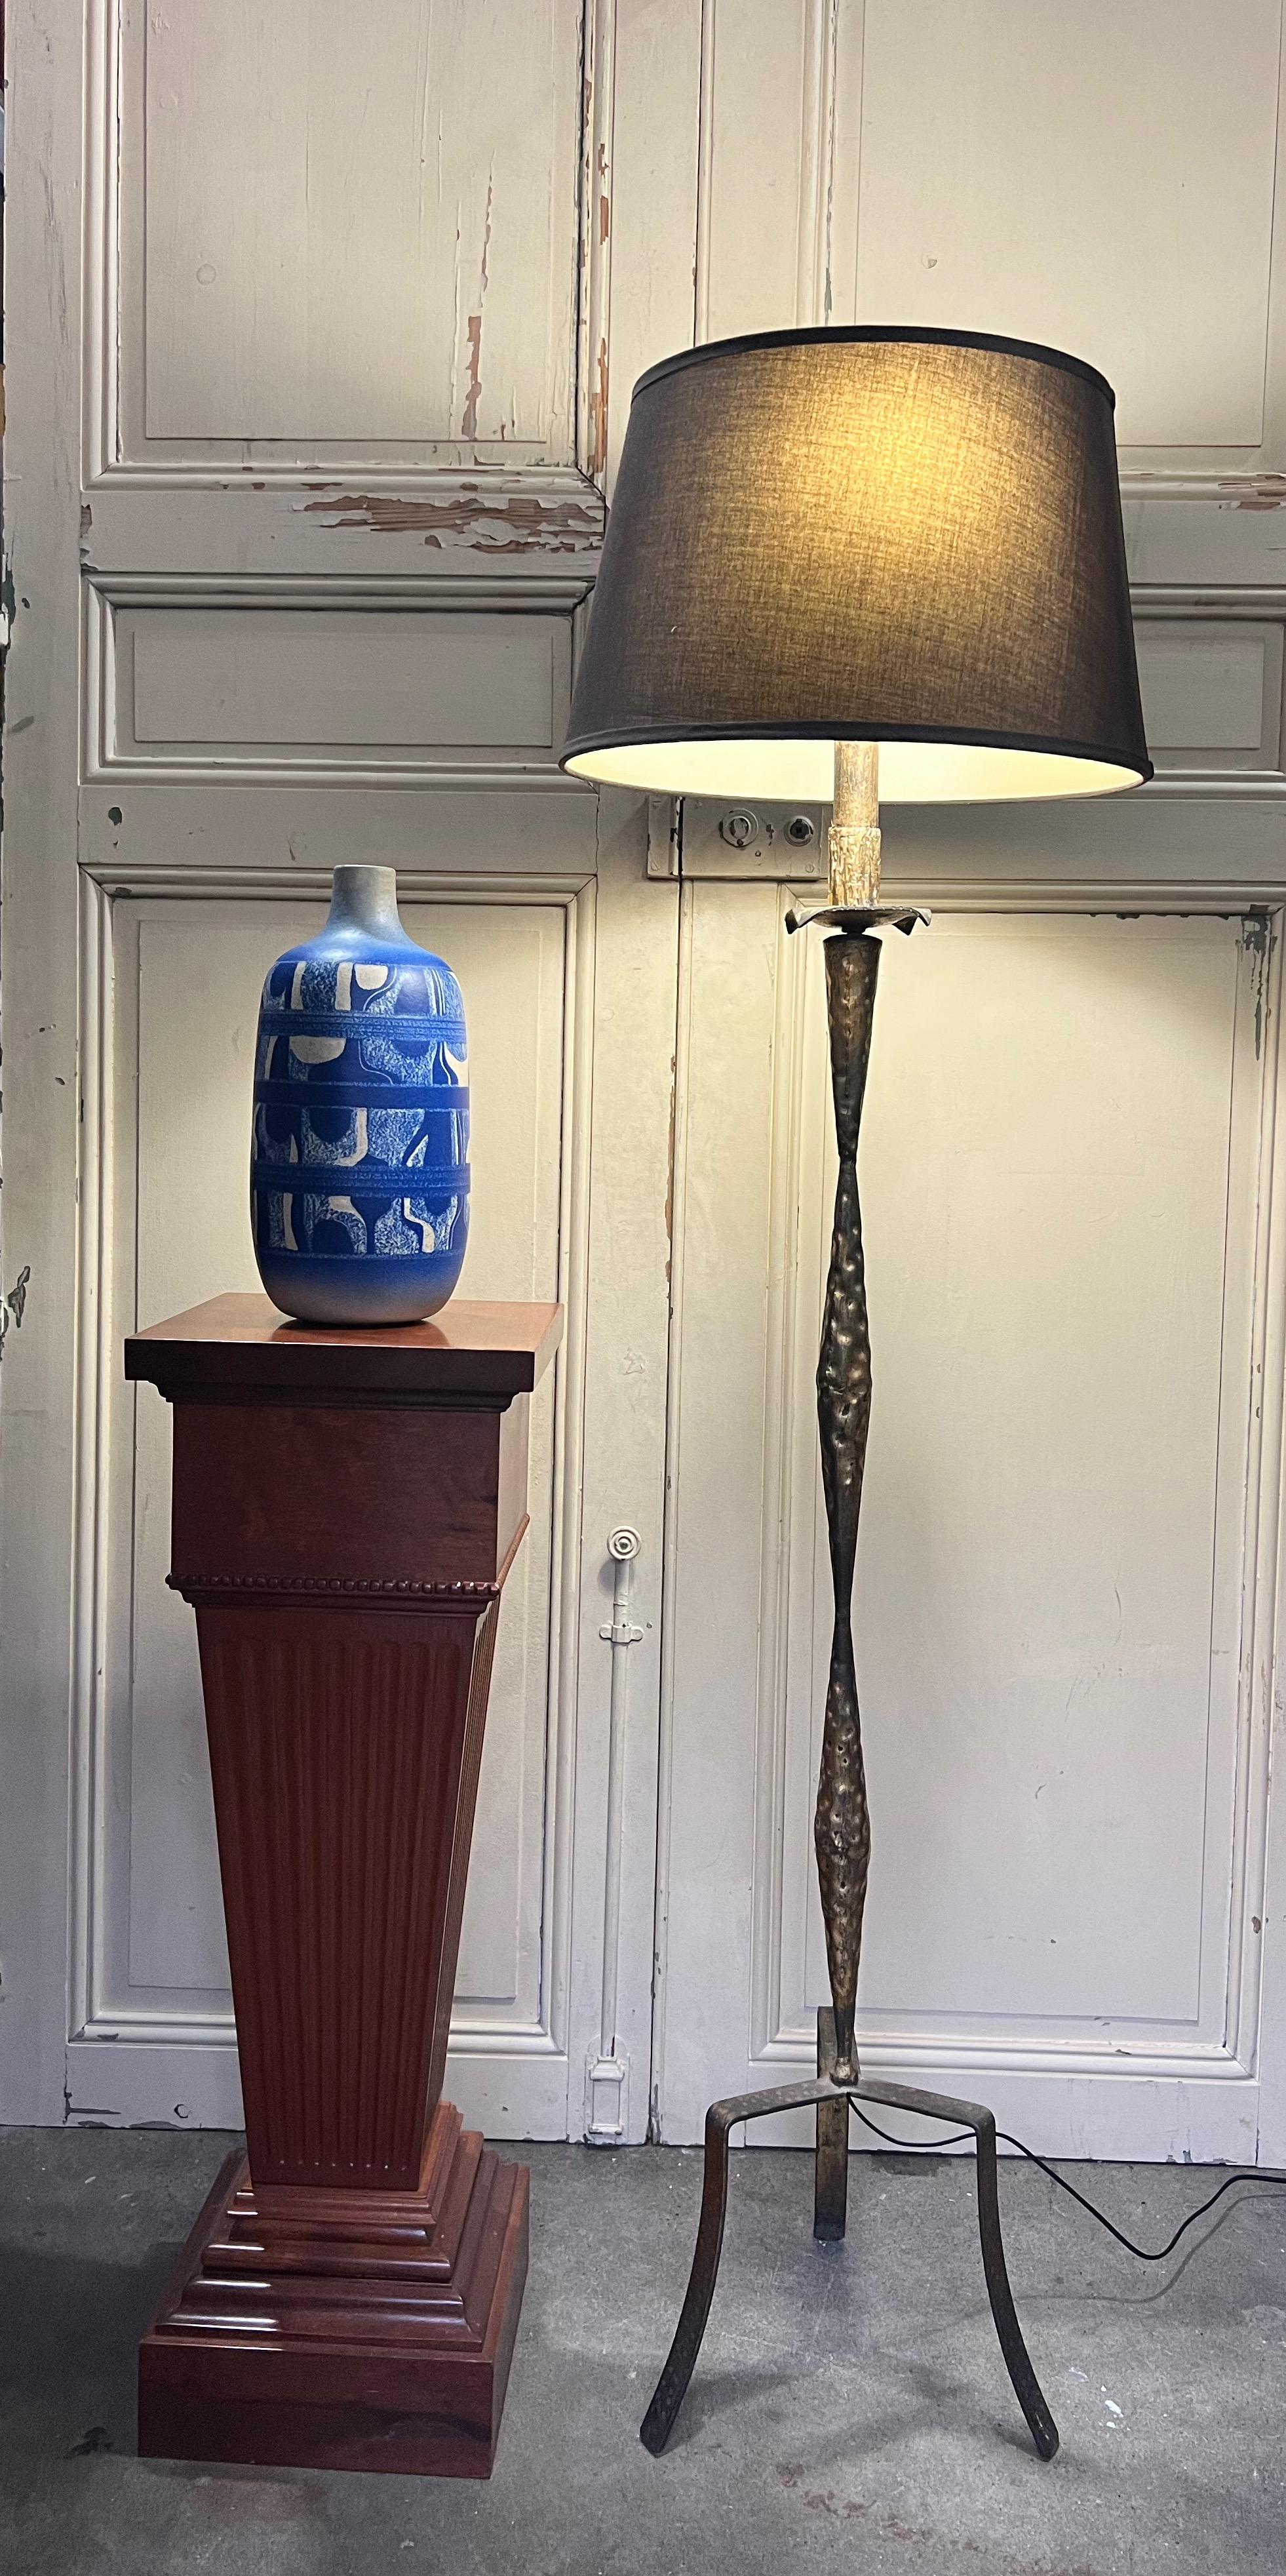 This Spanish Gilt Iron Floor Lamp, hailing from the mid-century modern era of the 1950s, stands tall on an elongated tripod base. The gilt iron and metal construction, with its rough hammered texture, brings an unusual and unique aesthetic to the